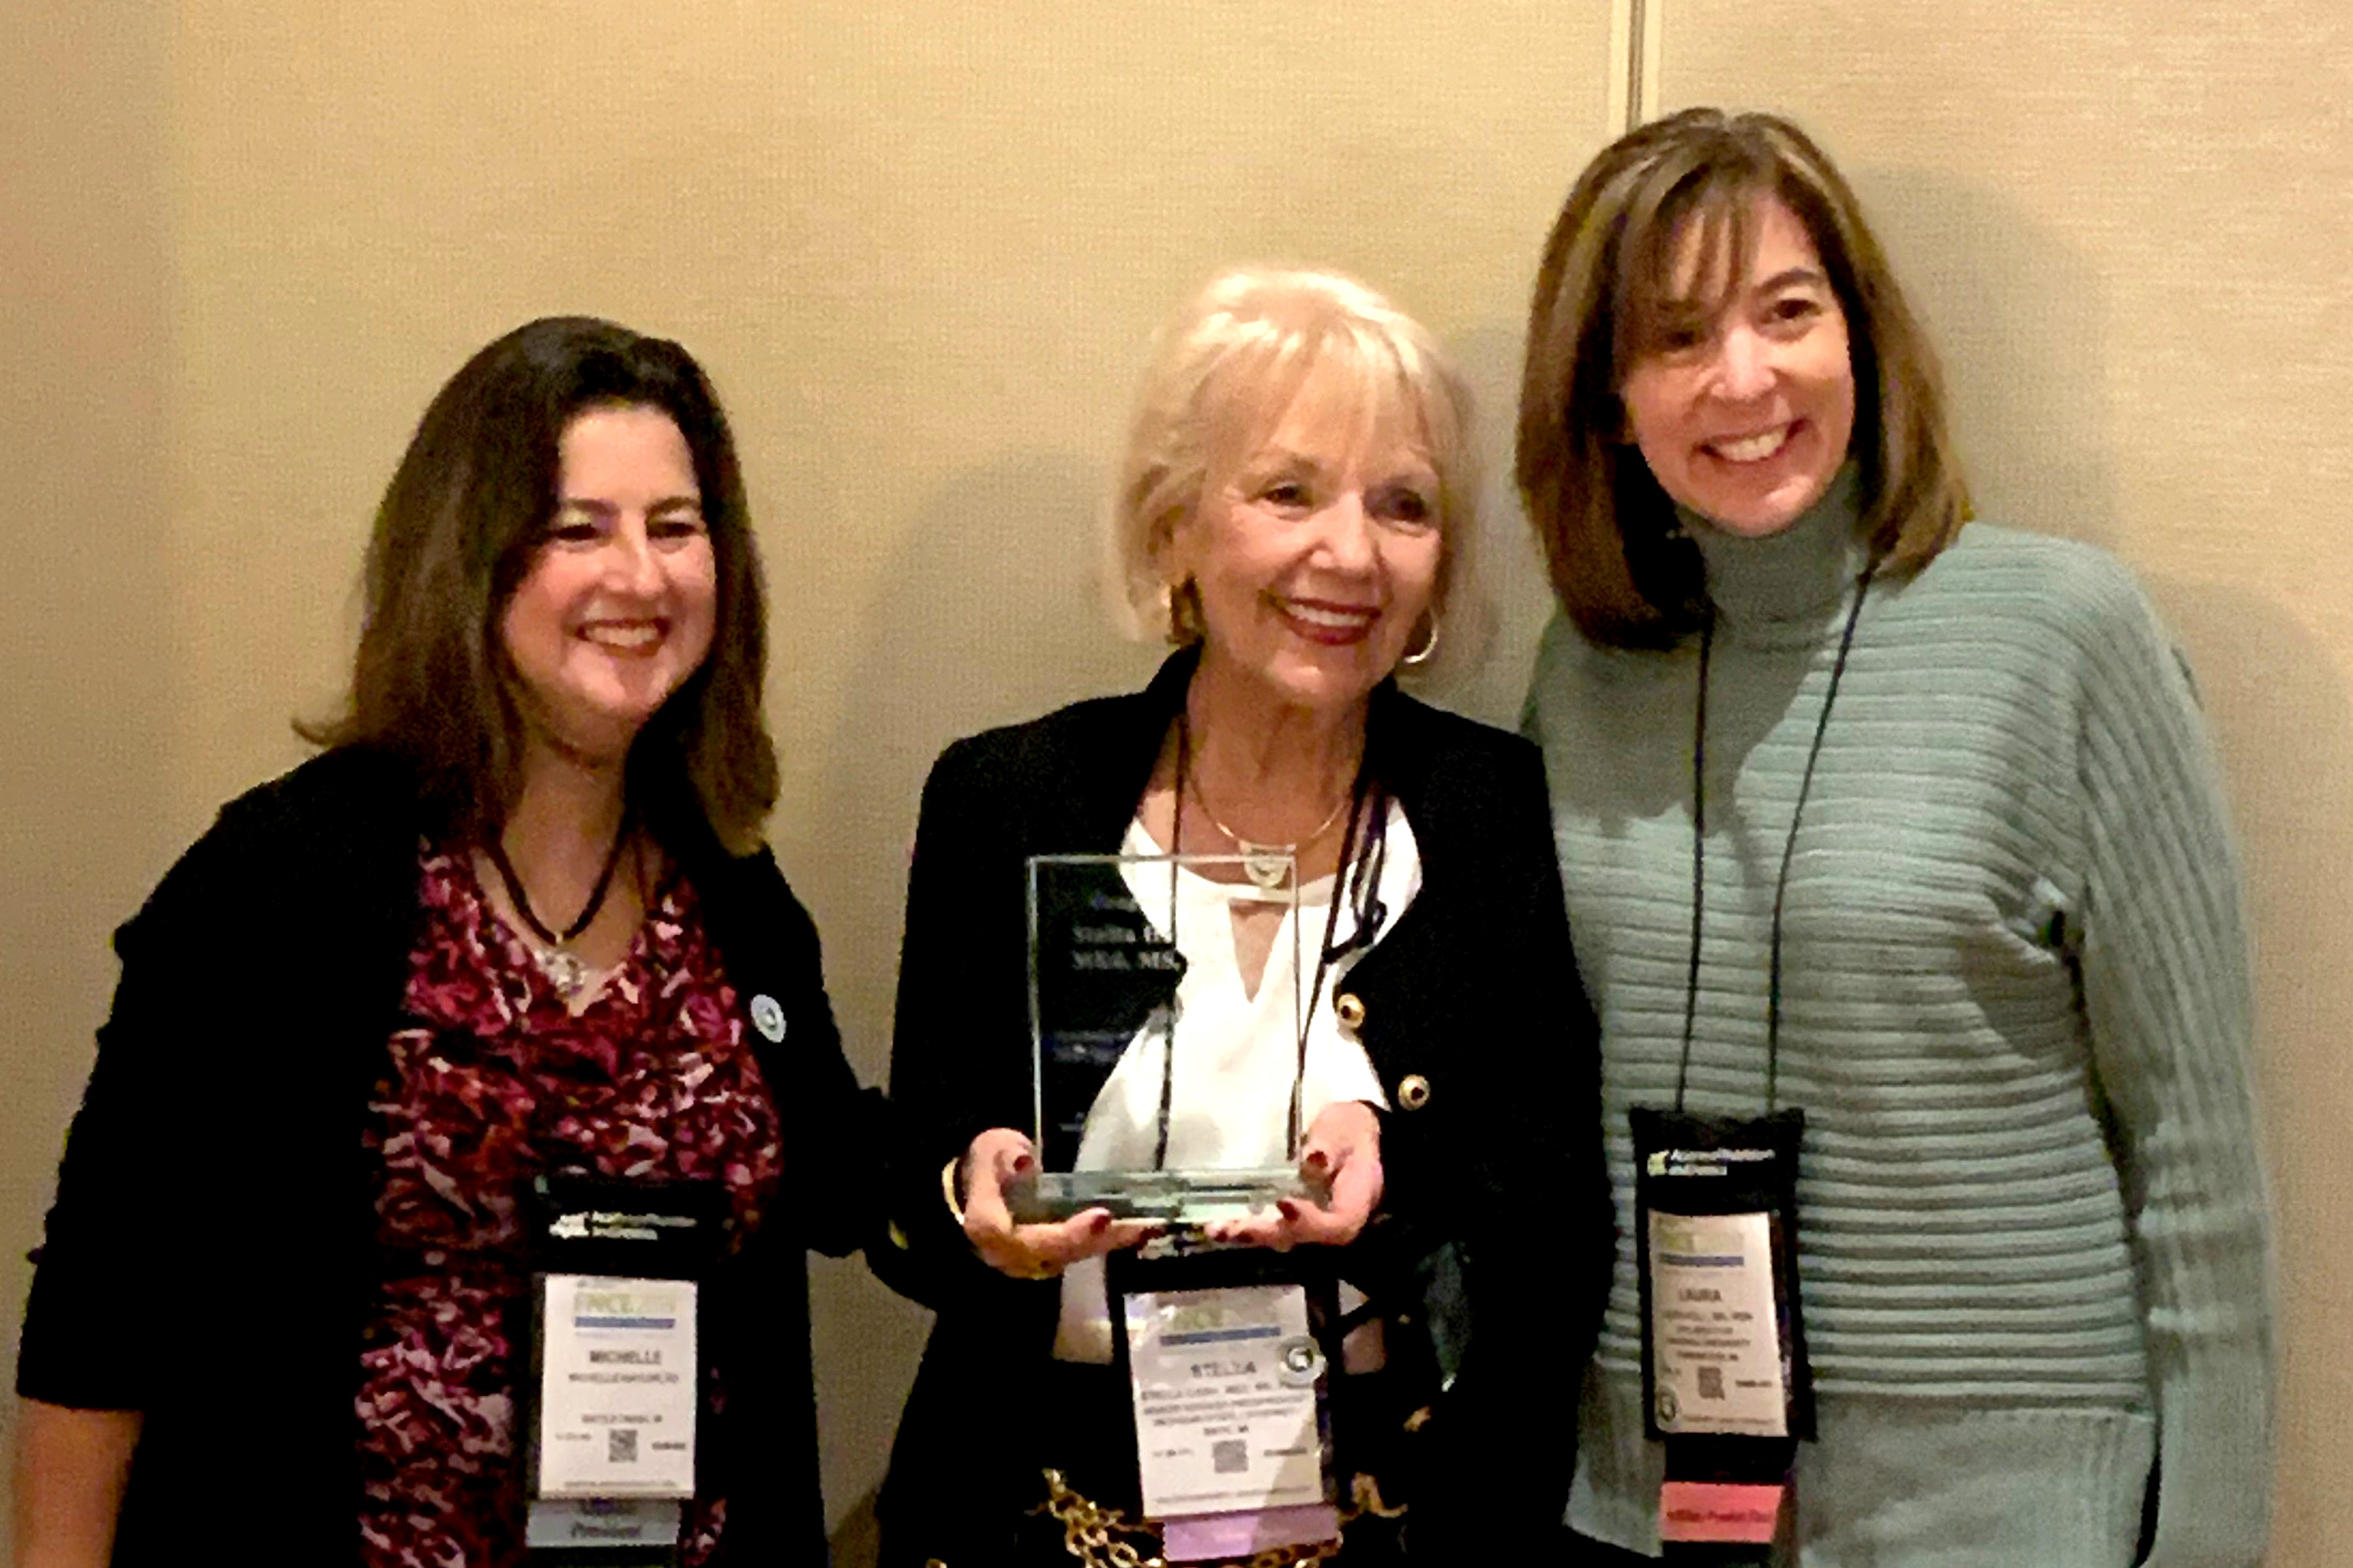 Stella H. Cash received the Academy of Nutrition and Dietetics 2019 Marjorie Hulsizer Copher Award